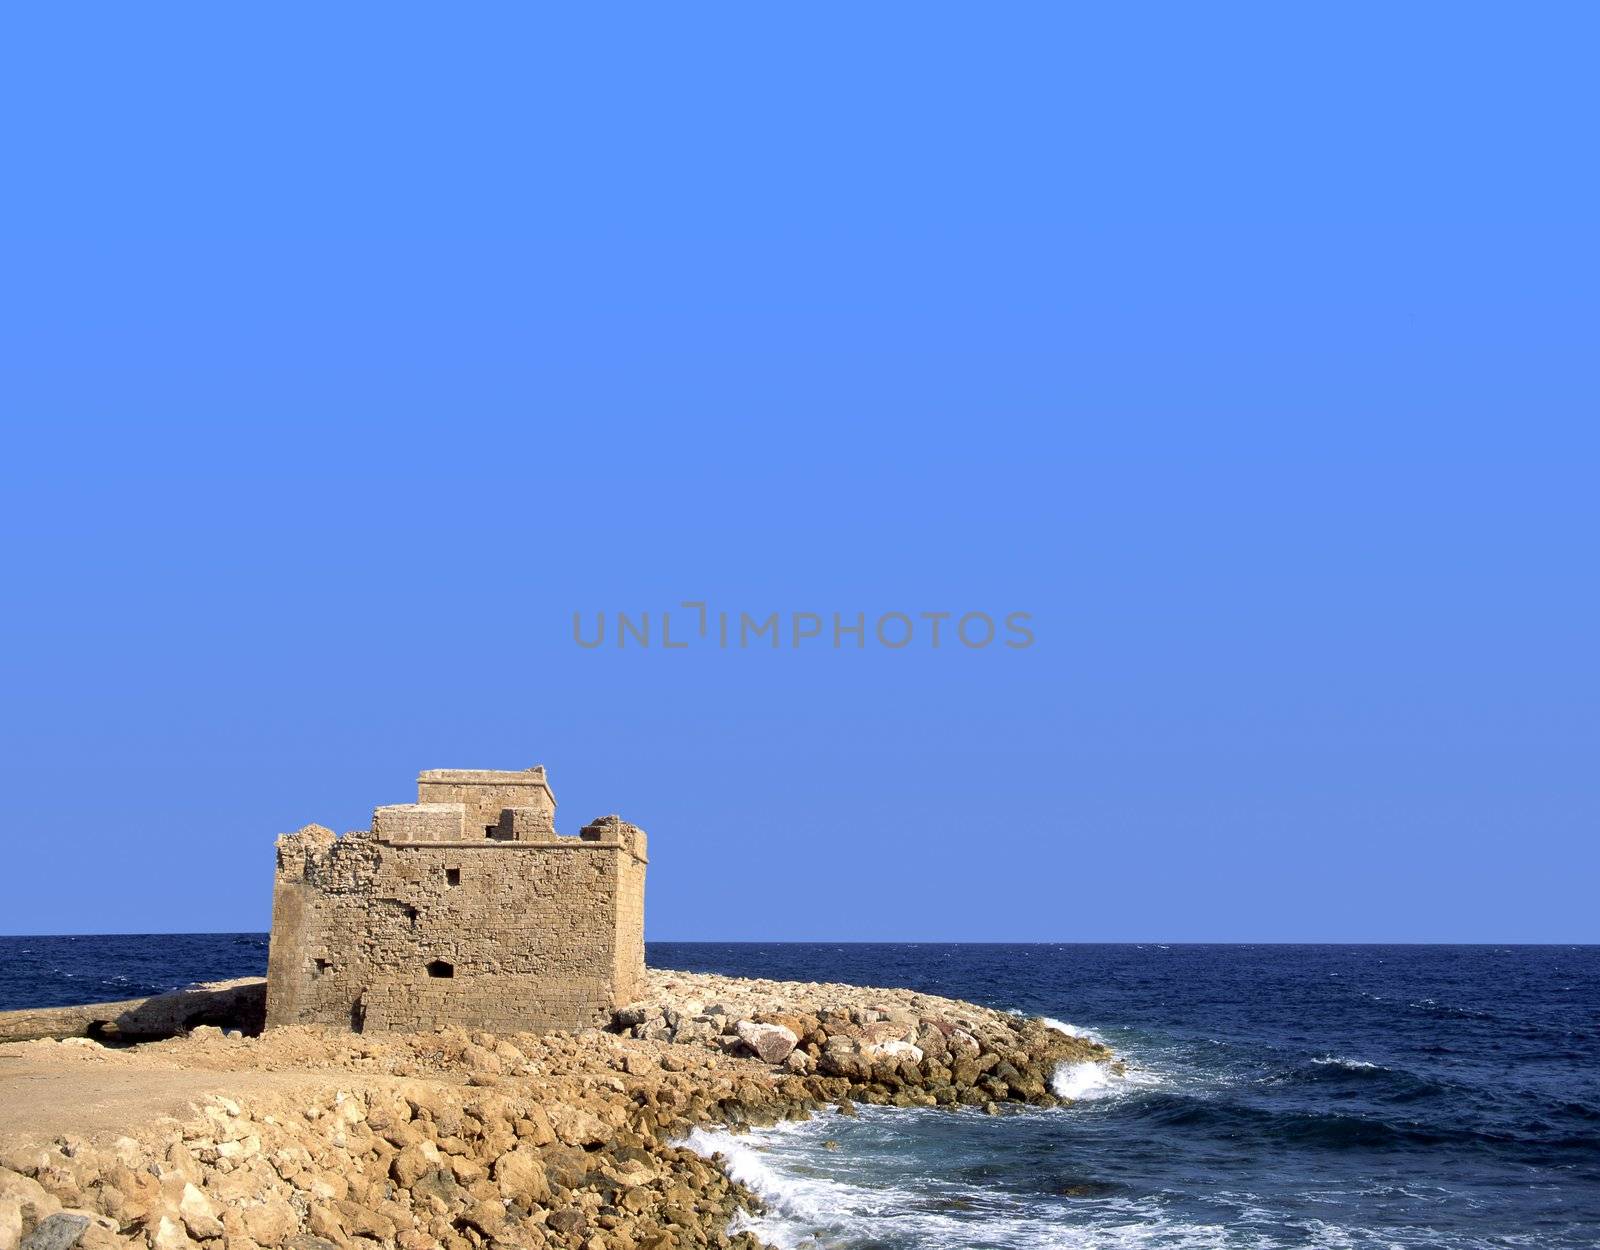 The medieval fort of Paphos, Cyprus